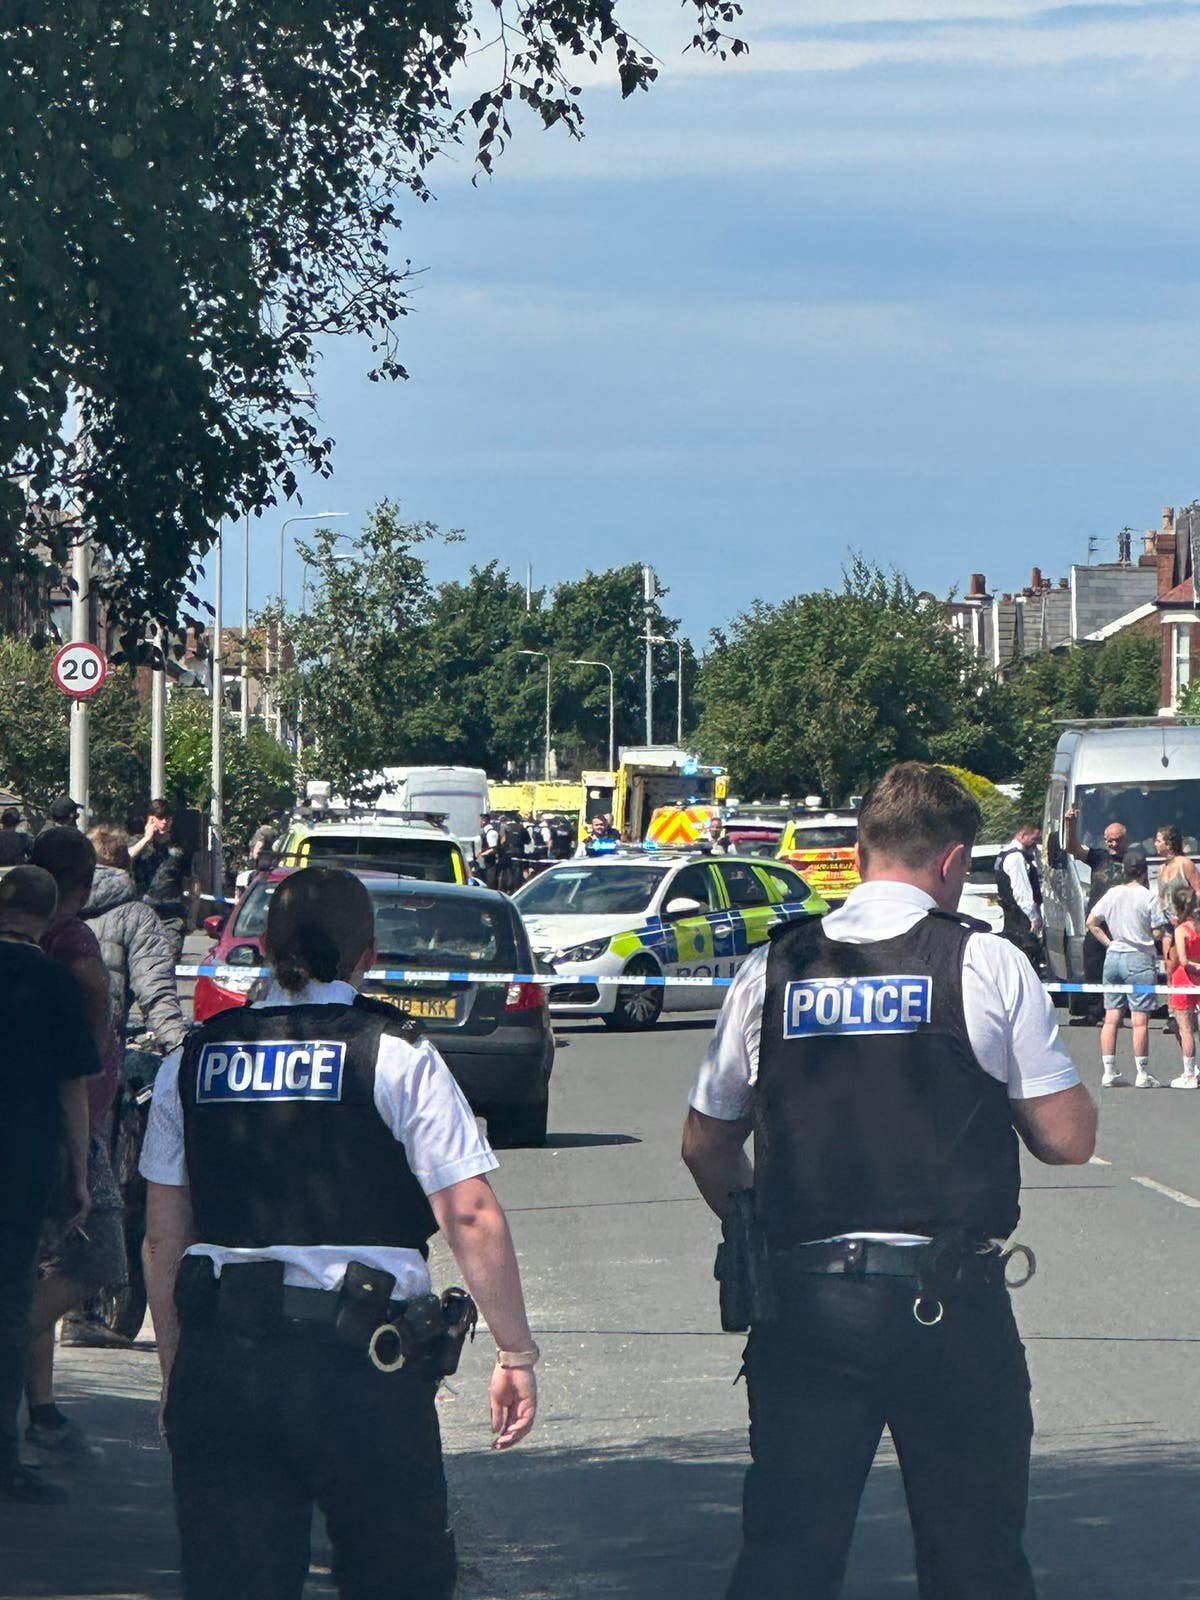 Southport mass stabbing: Major incident in Merseyside as several injured in 'mass stabbing'